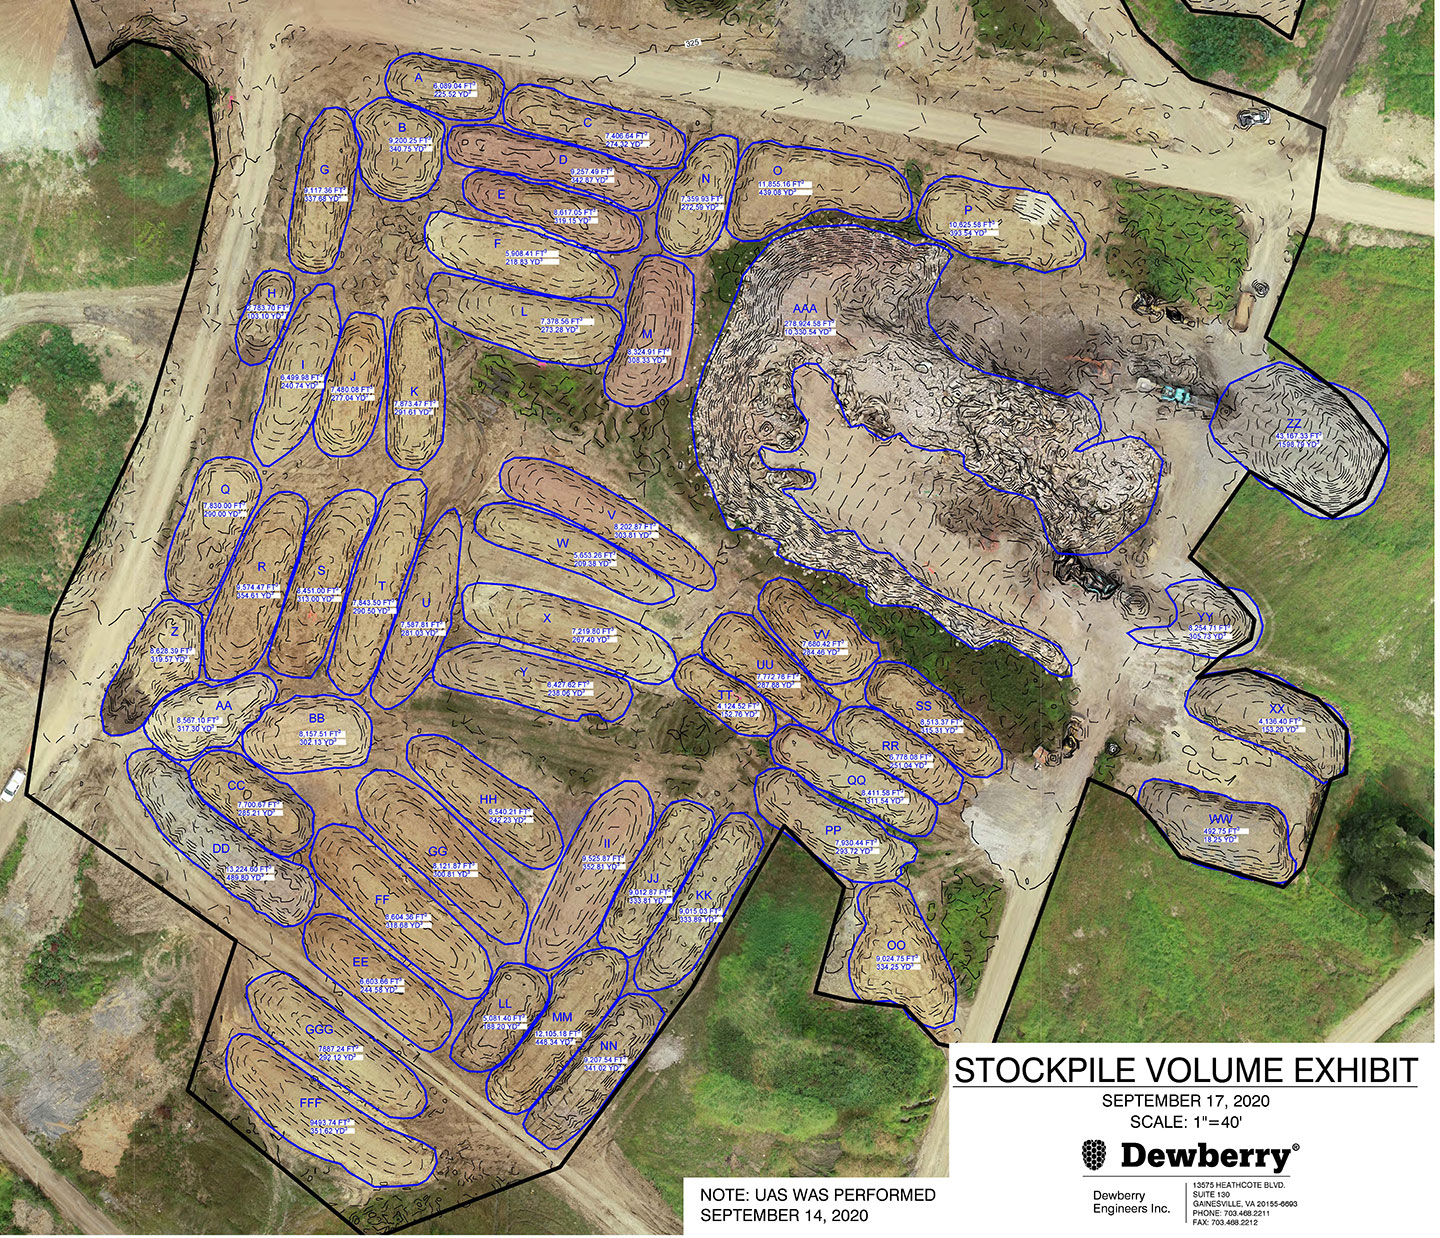 Georeferenced Orthomosaic Showing Remediated Soil Stockpiles